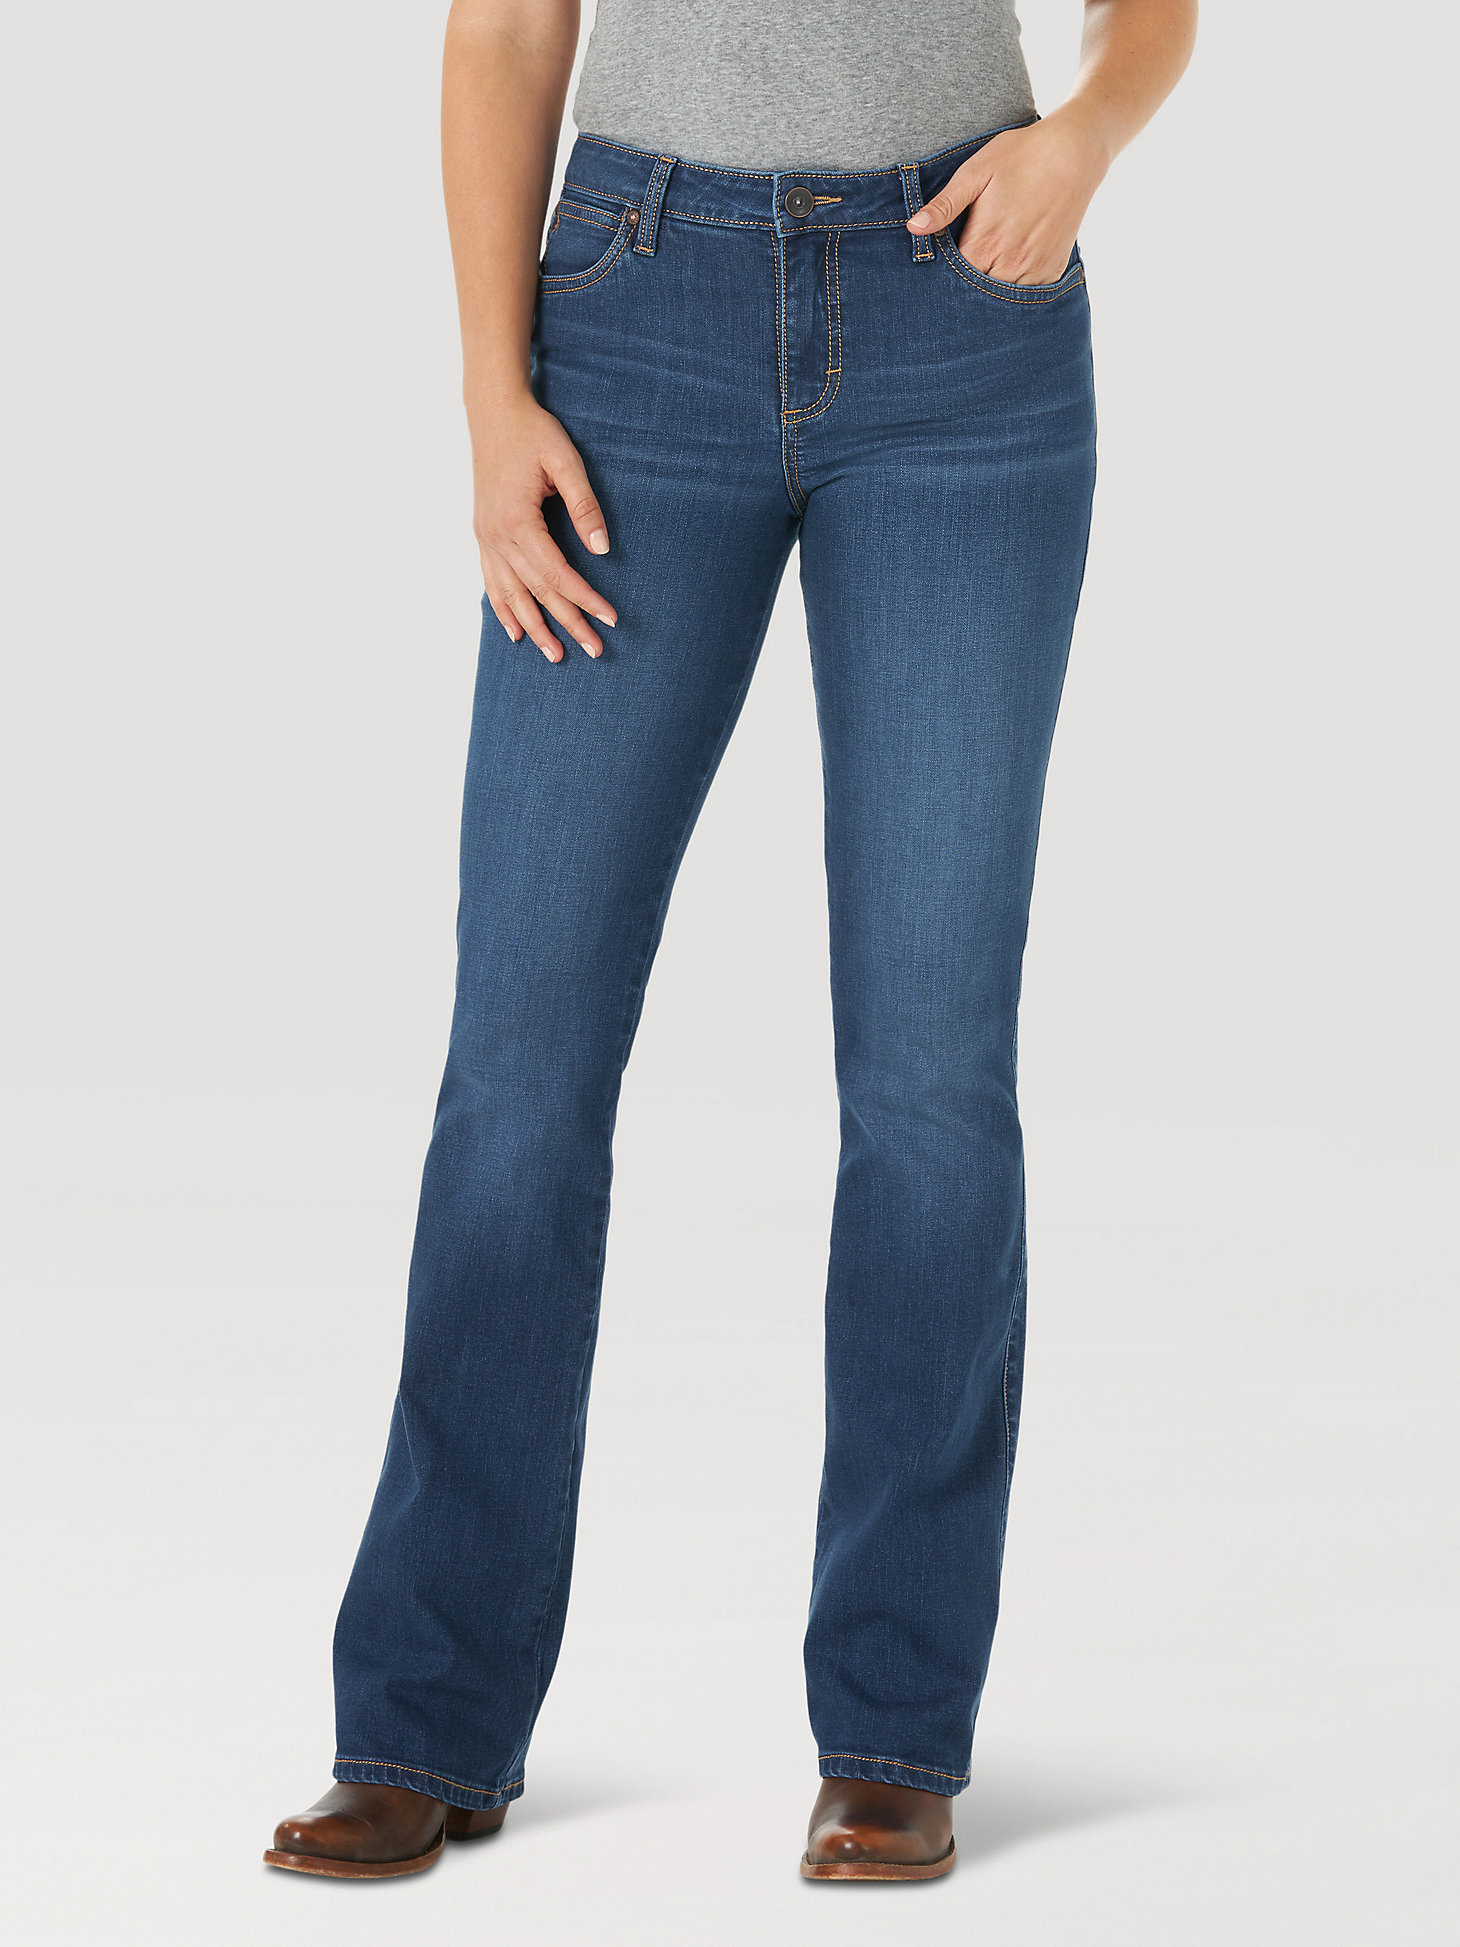 AURA FROM THE WOMEN AT WRANGLER INSTANTLY SLIMMING JEANS WUT74MB NO TAX SELL 